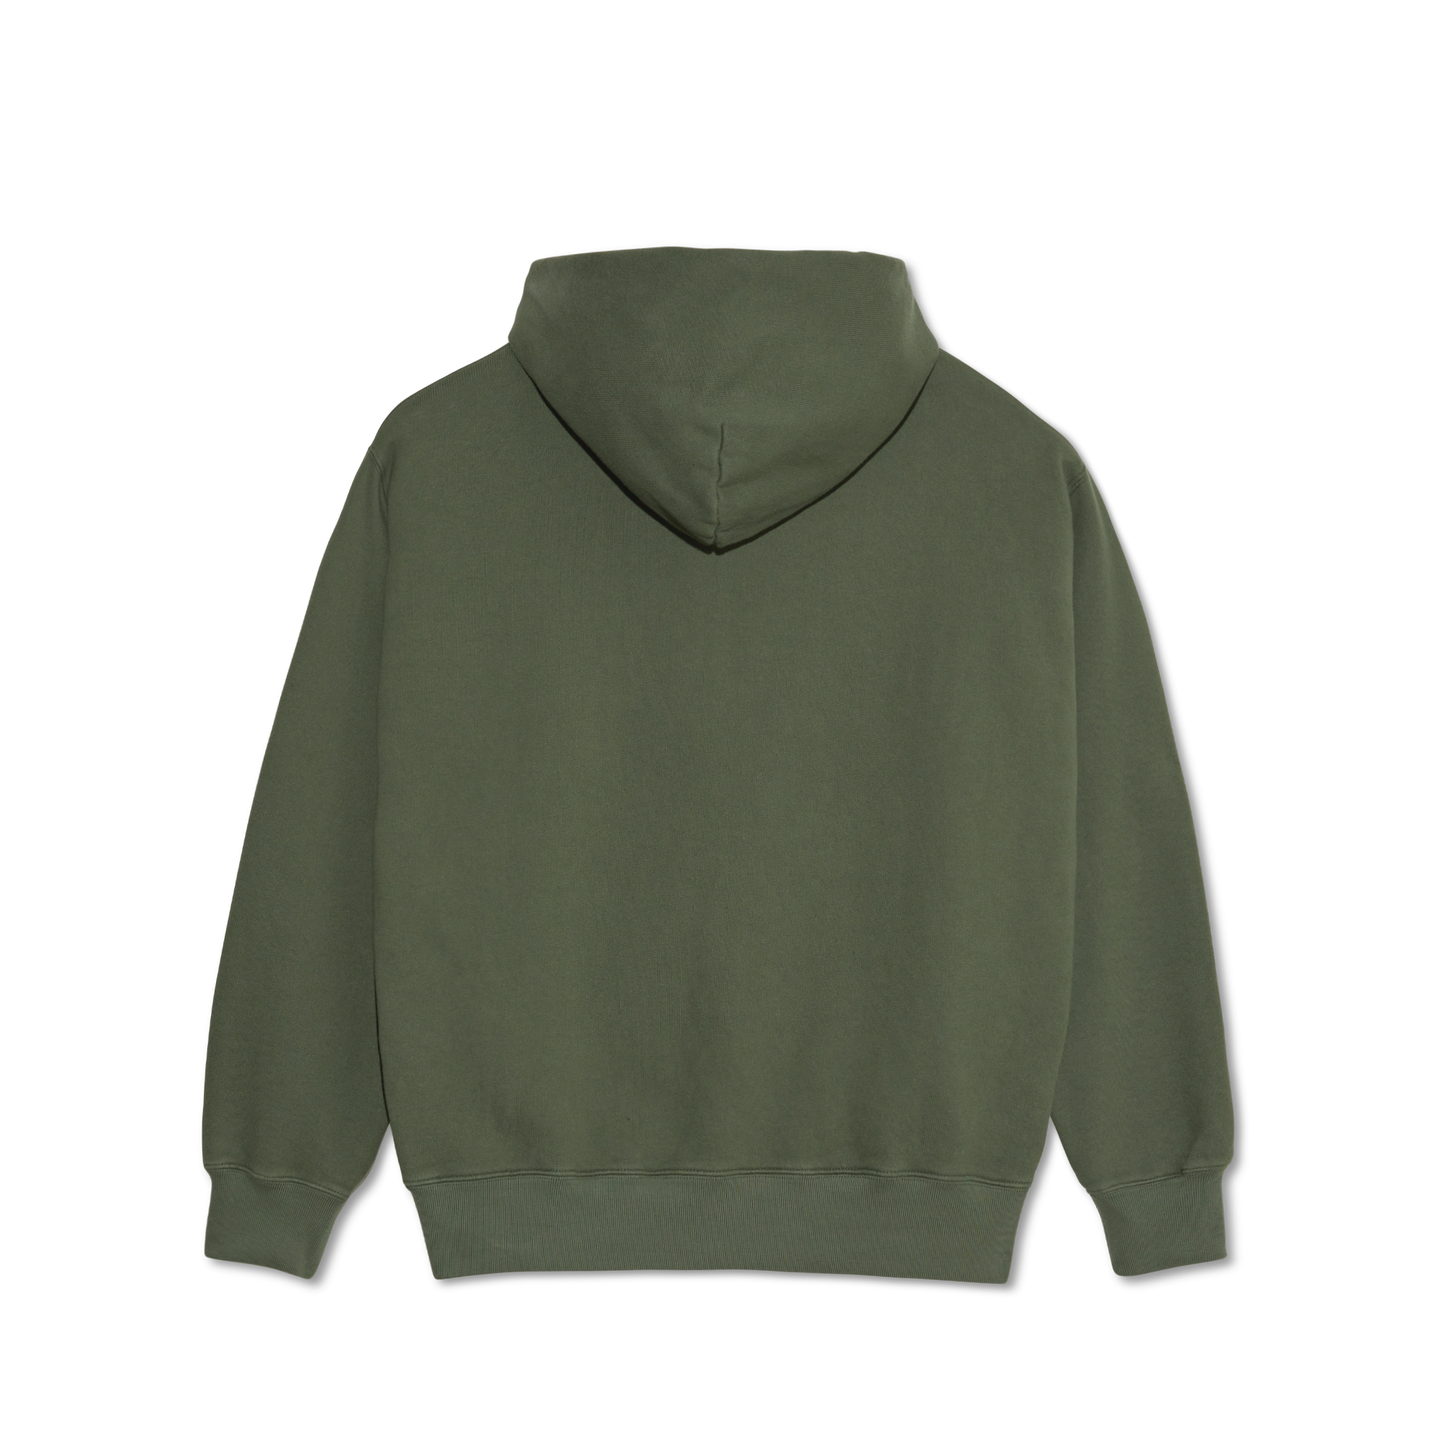 Polar We Blew It At Some Point Ed Hoodie Grey Green